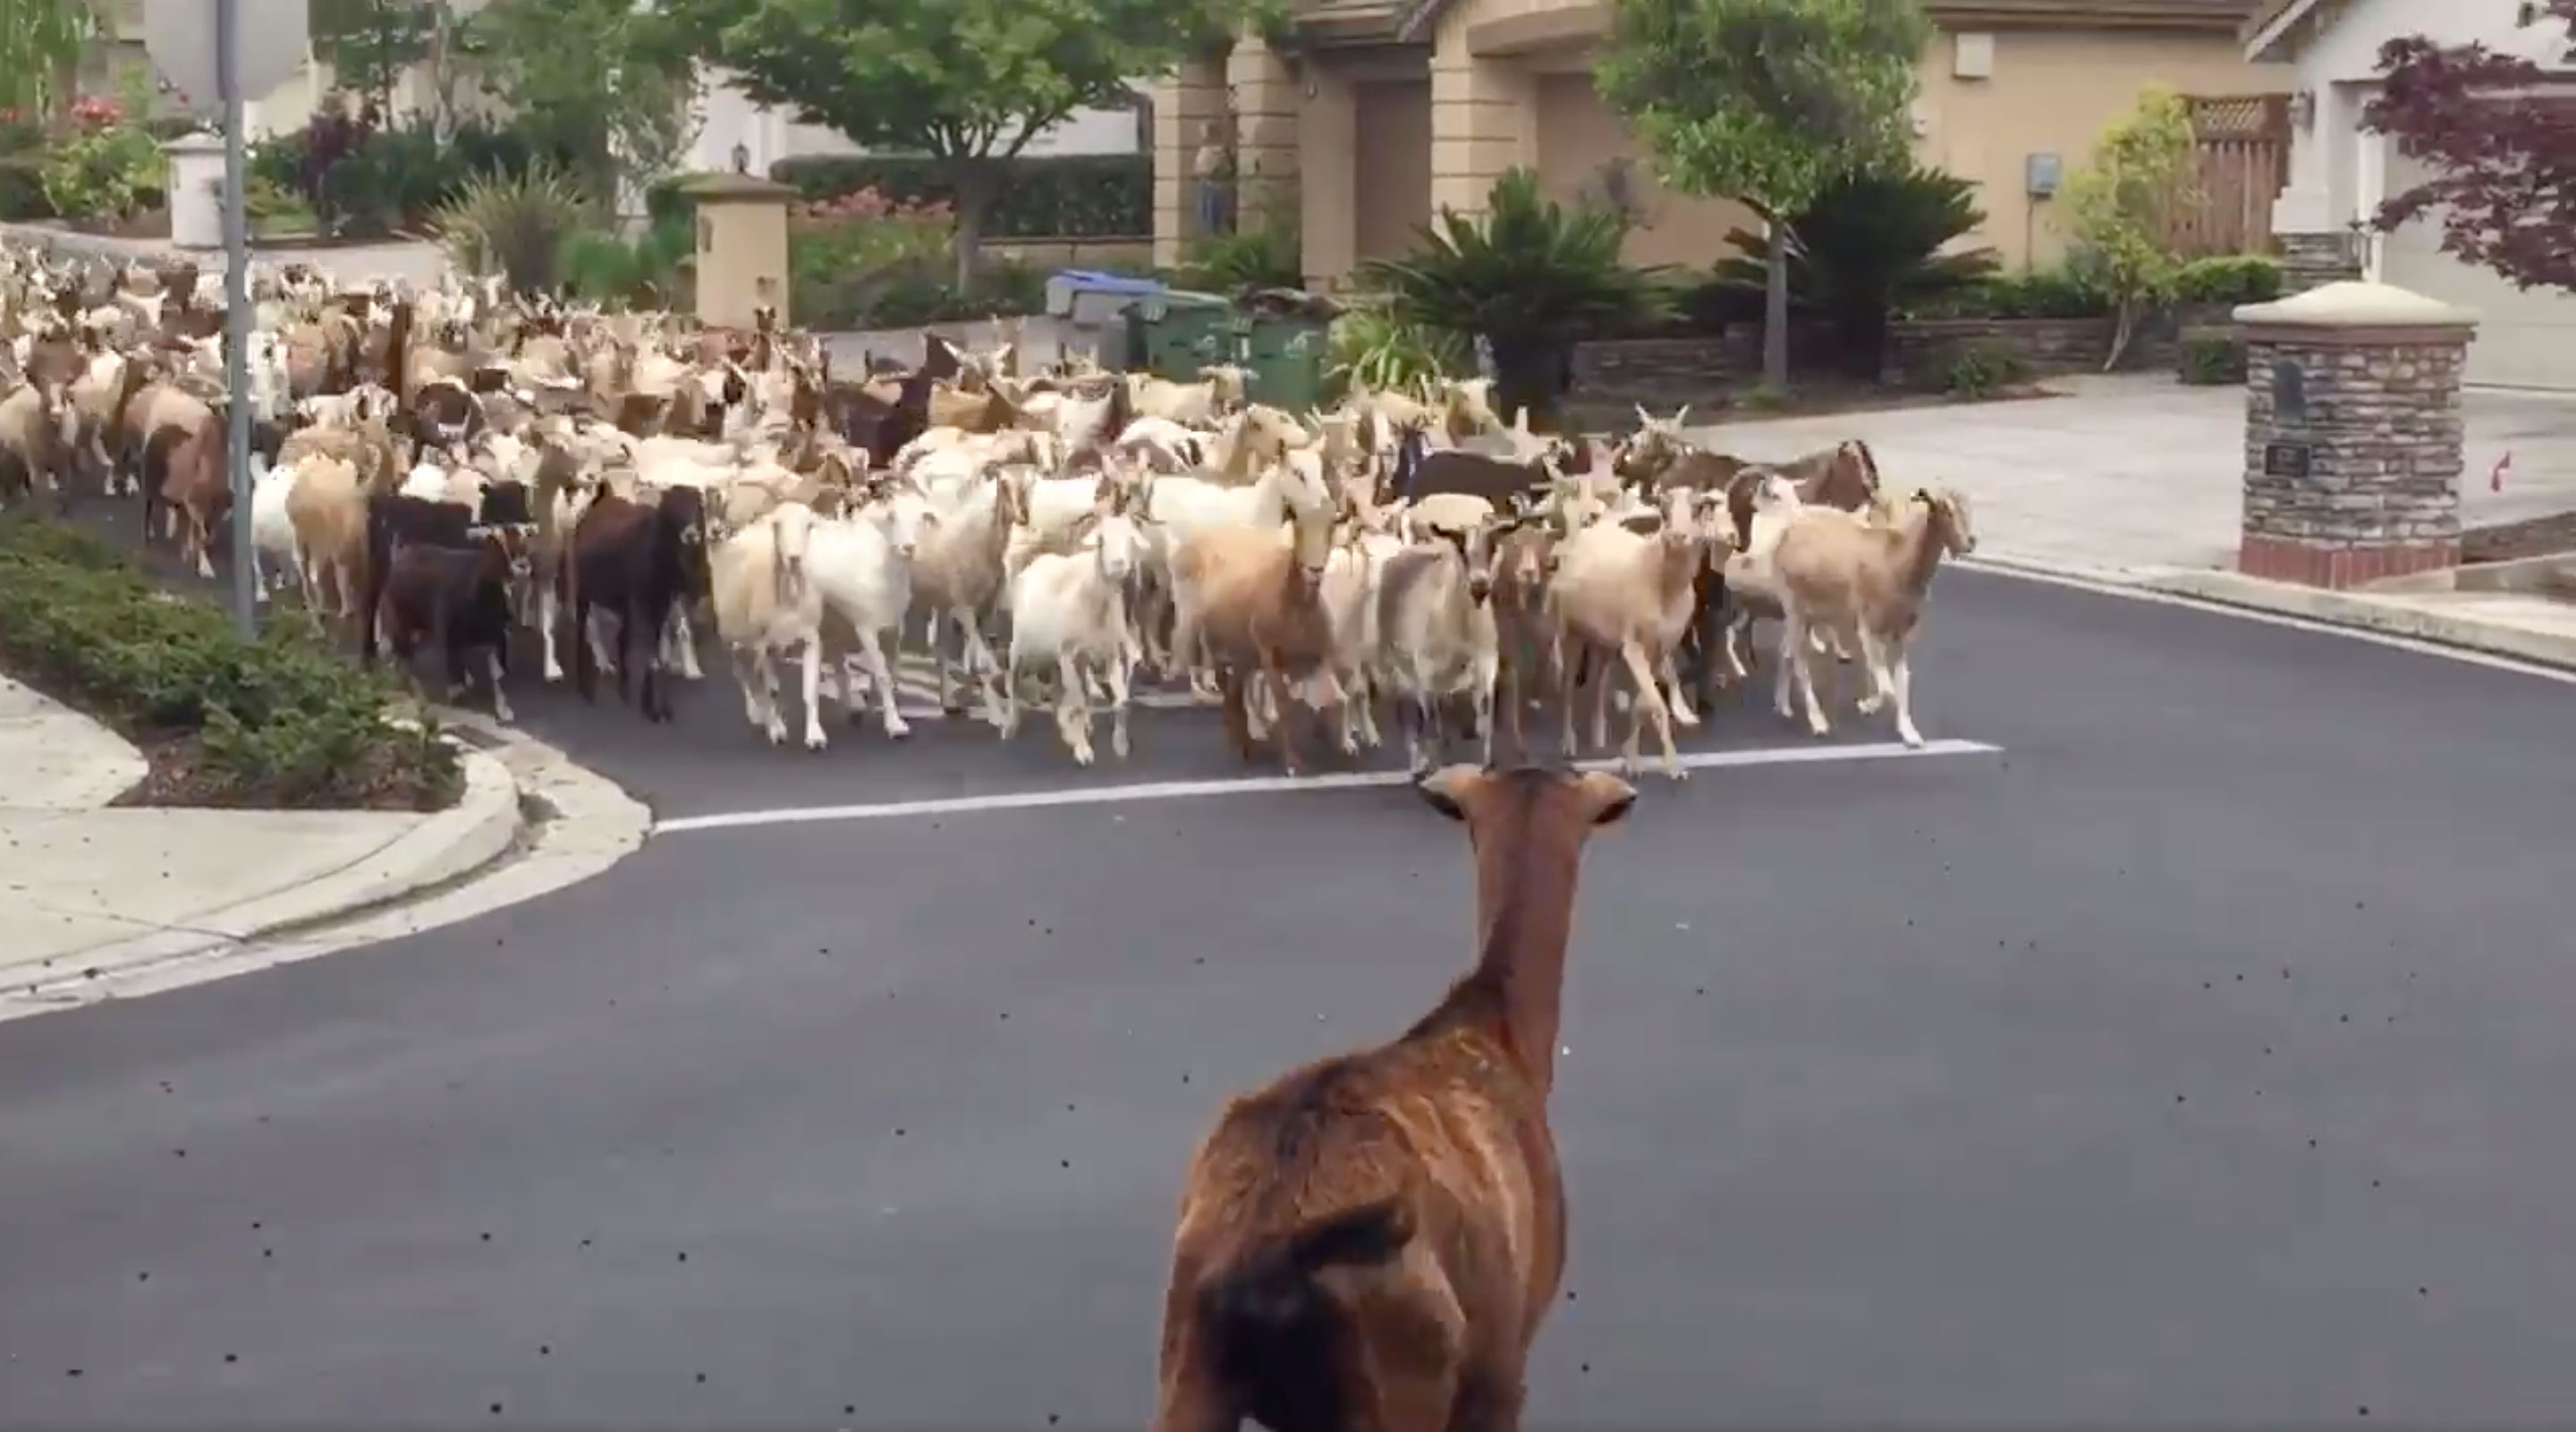 200 Goats Break Out Of Fence To Run Through Streets | Time